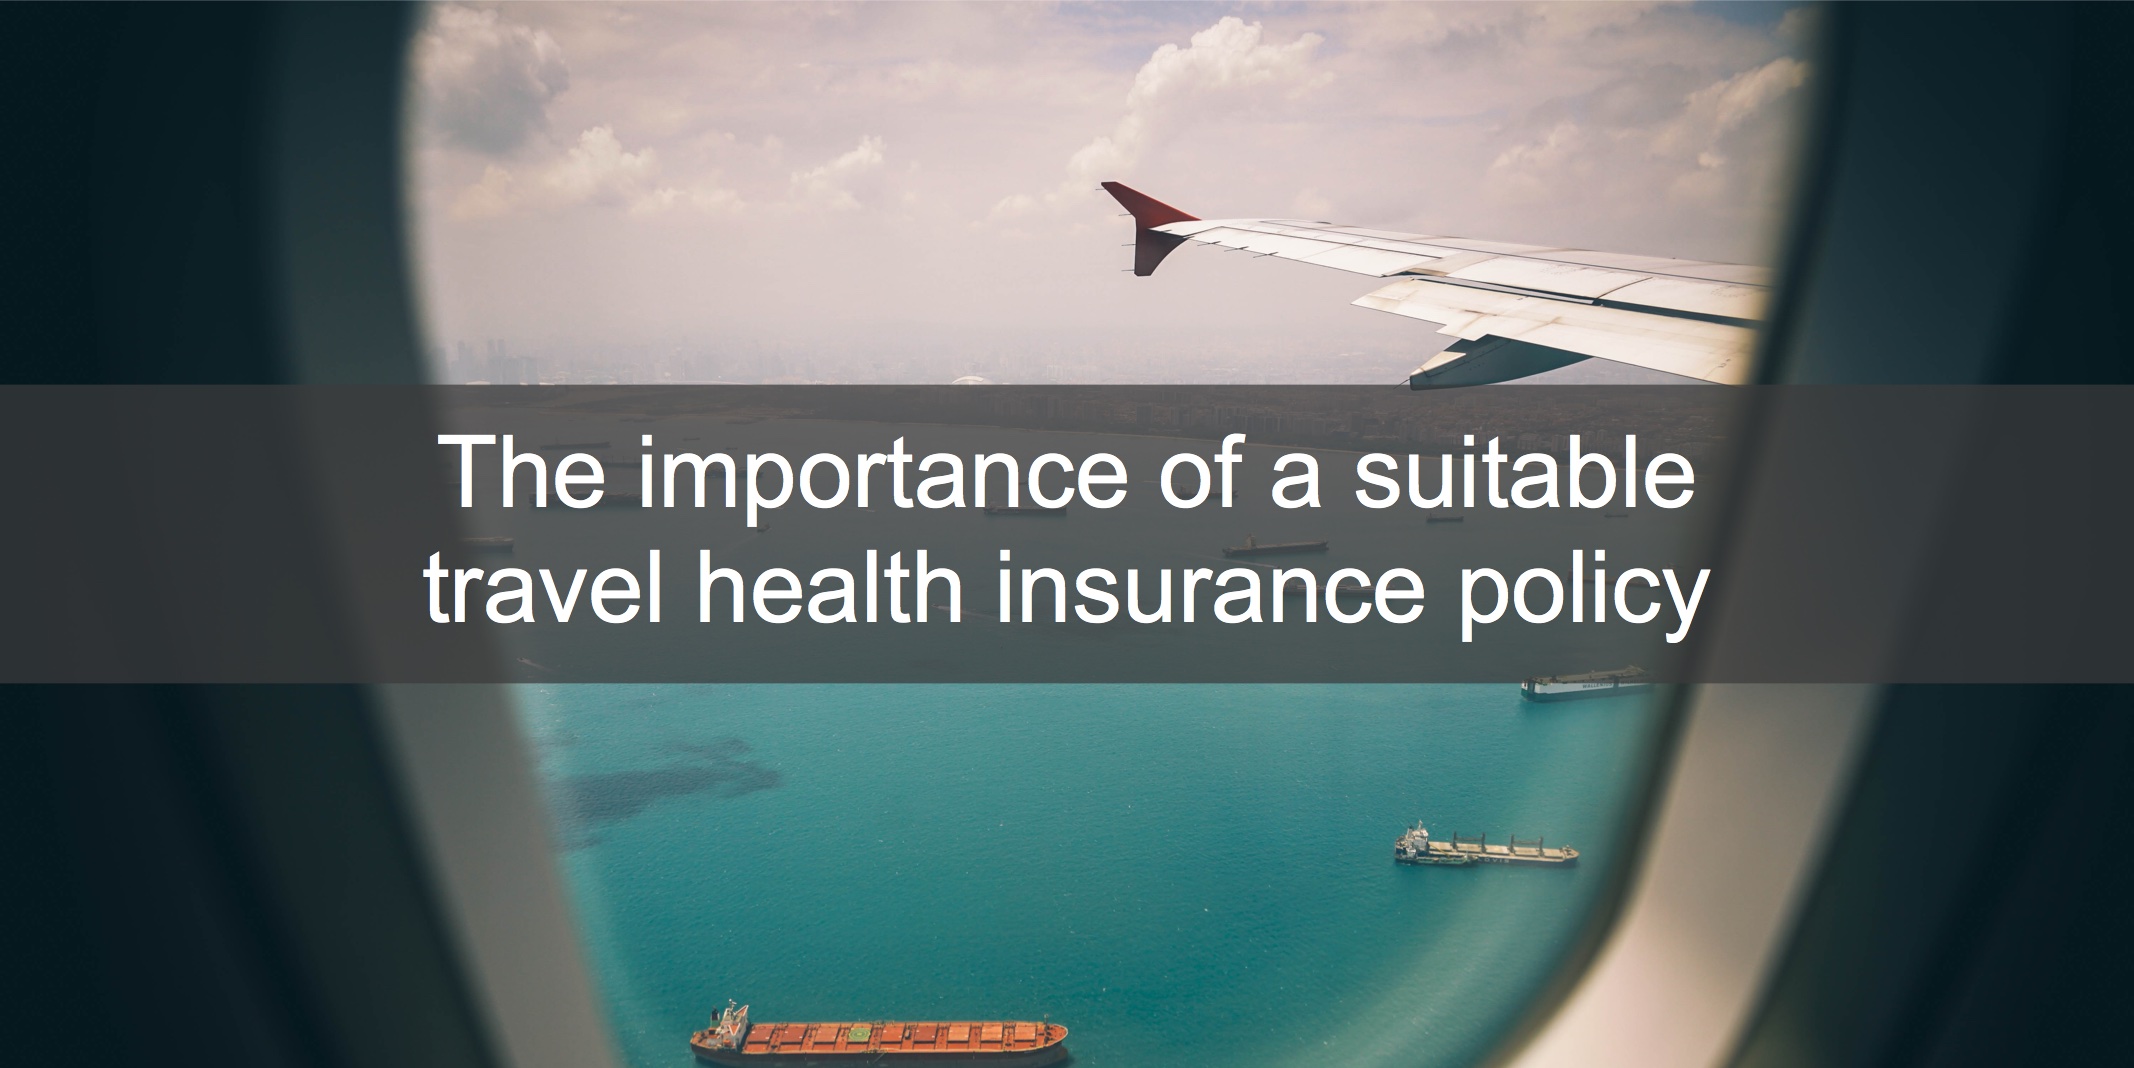 The importance of a suitable travel health insurance policy